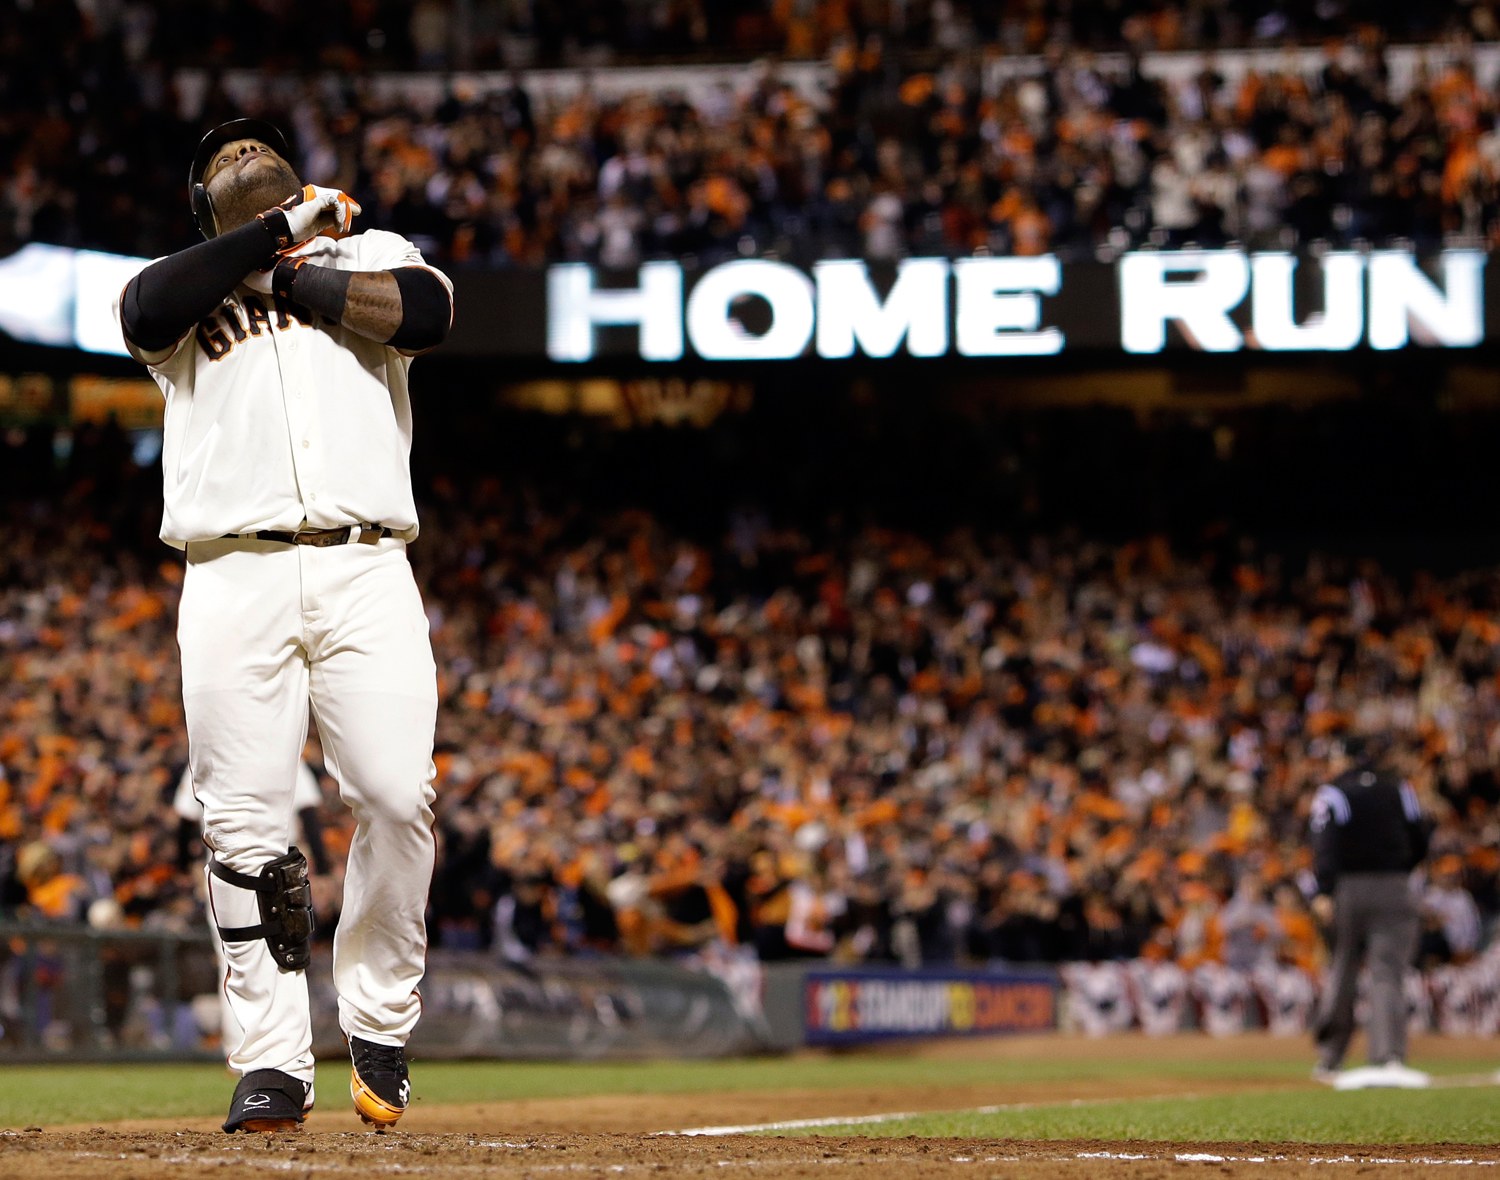 Sandoval's historic night propels Giants in Game 1